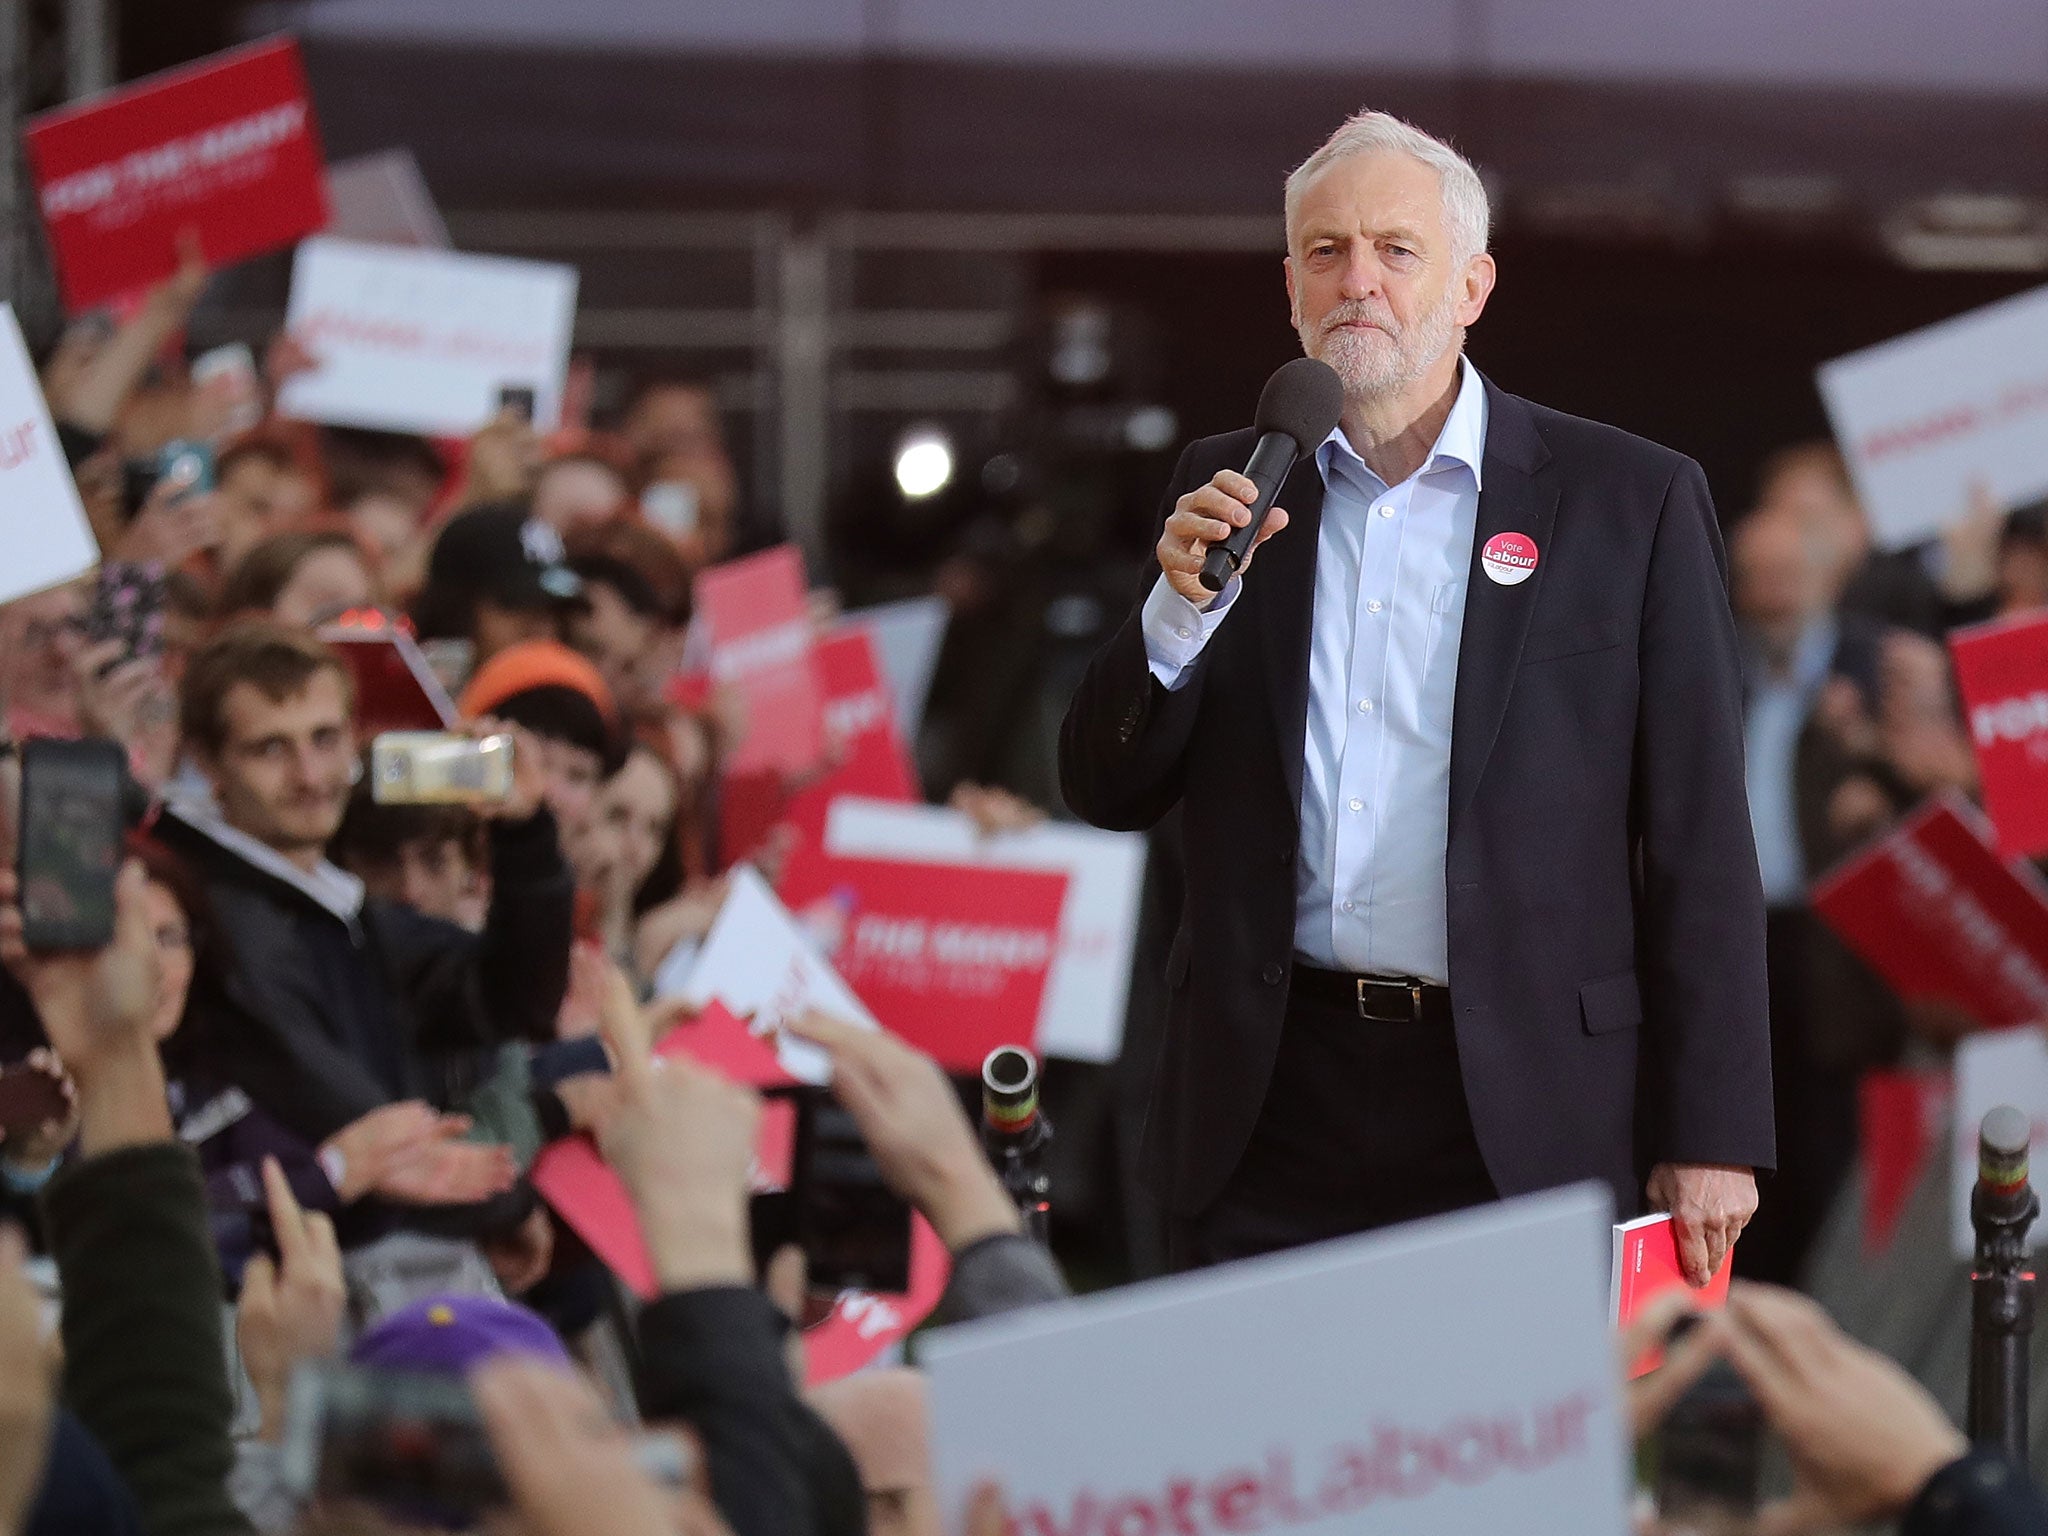 Jeremy Corbyn rallied Labour supporters around the country